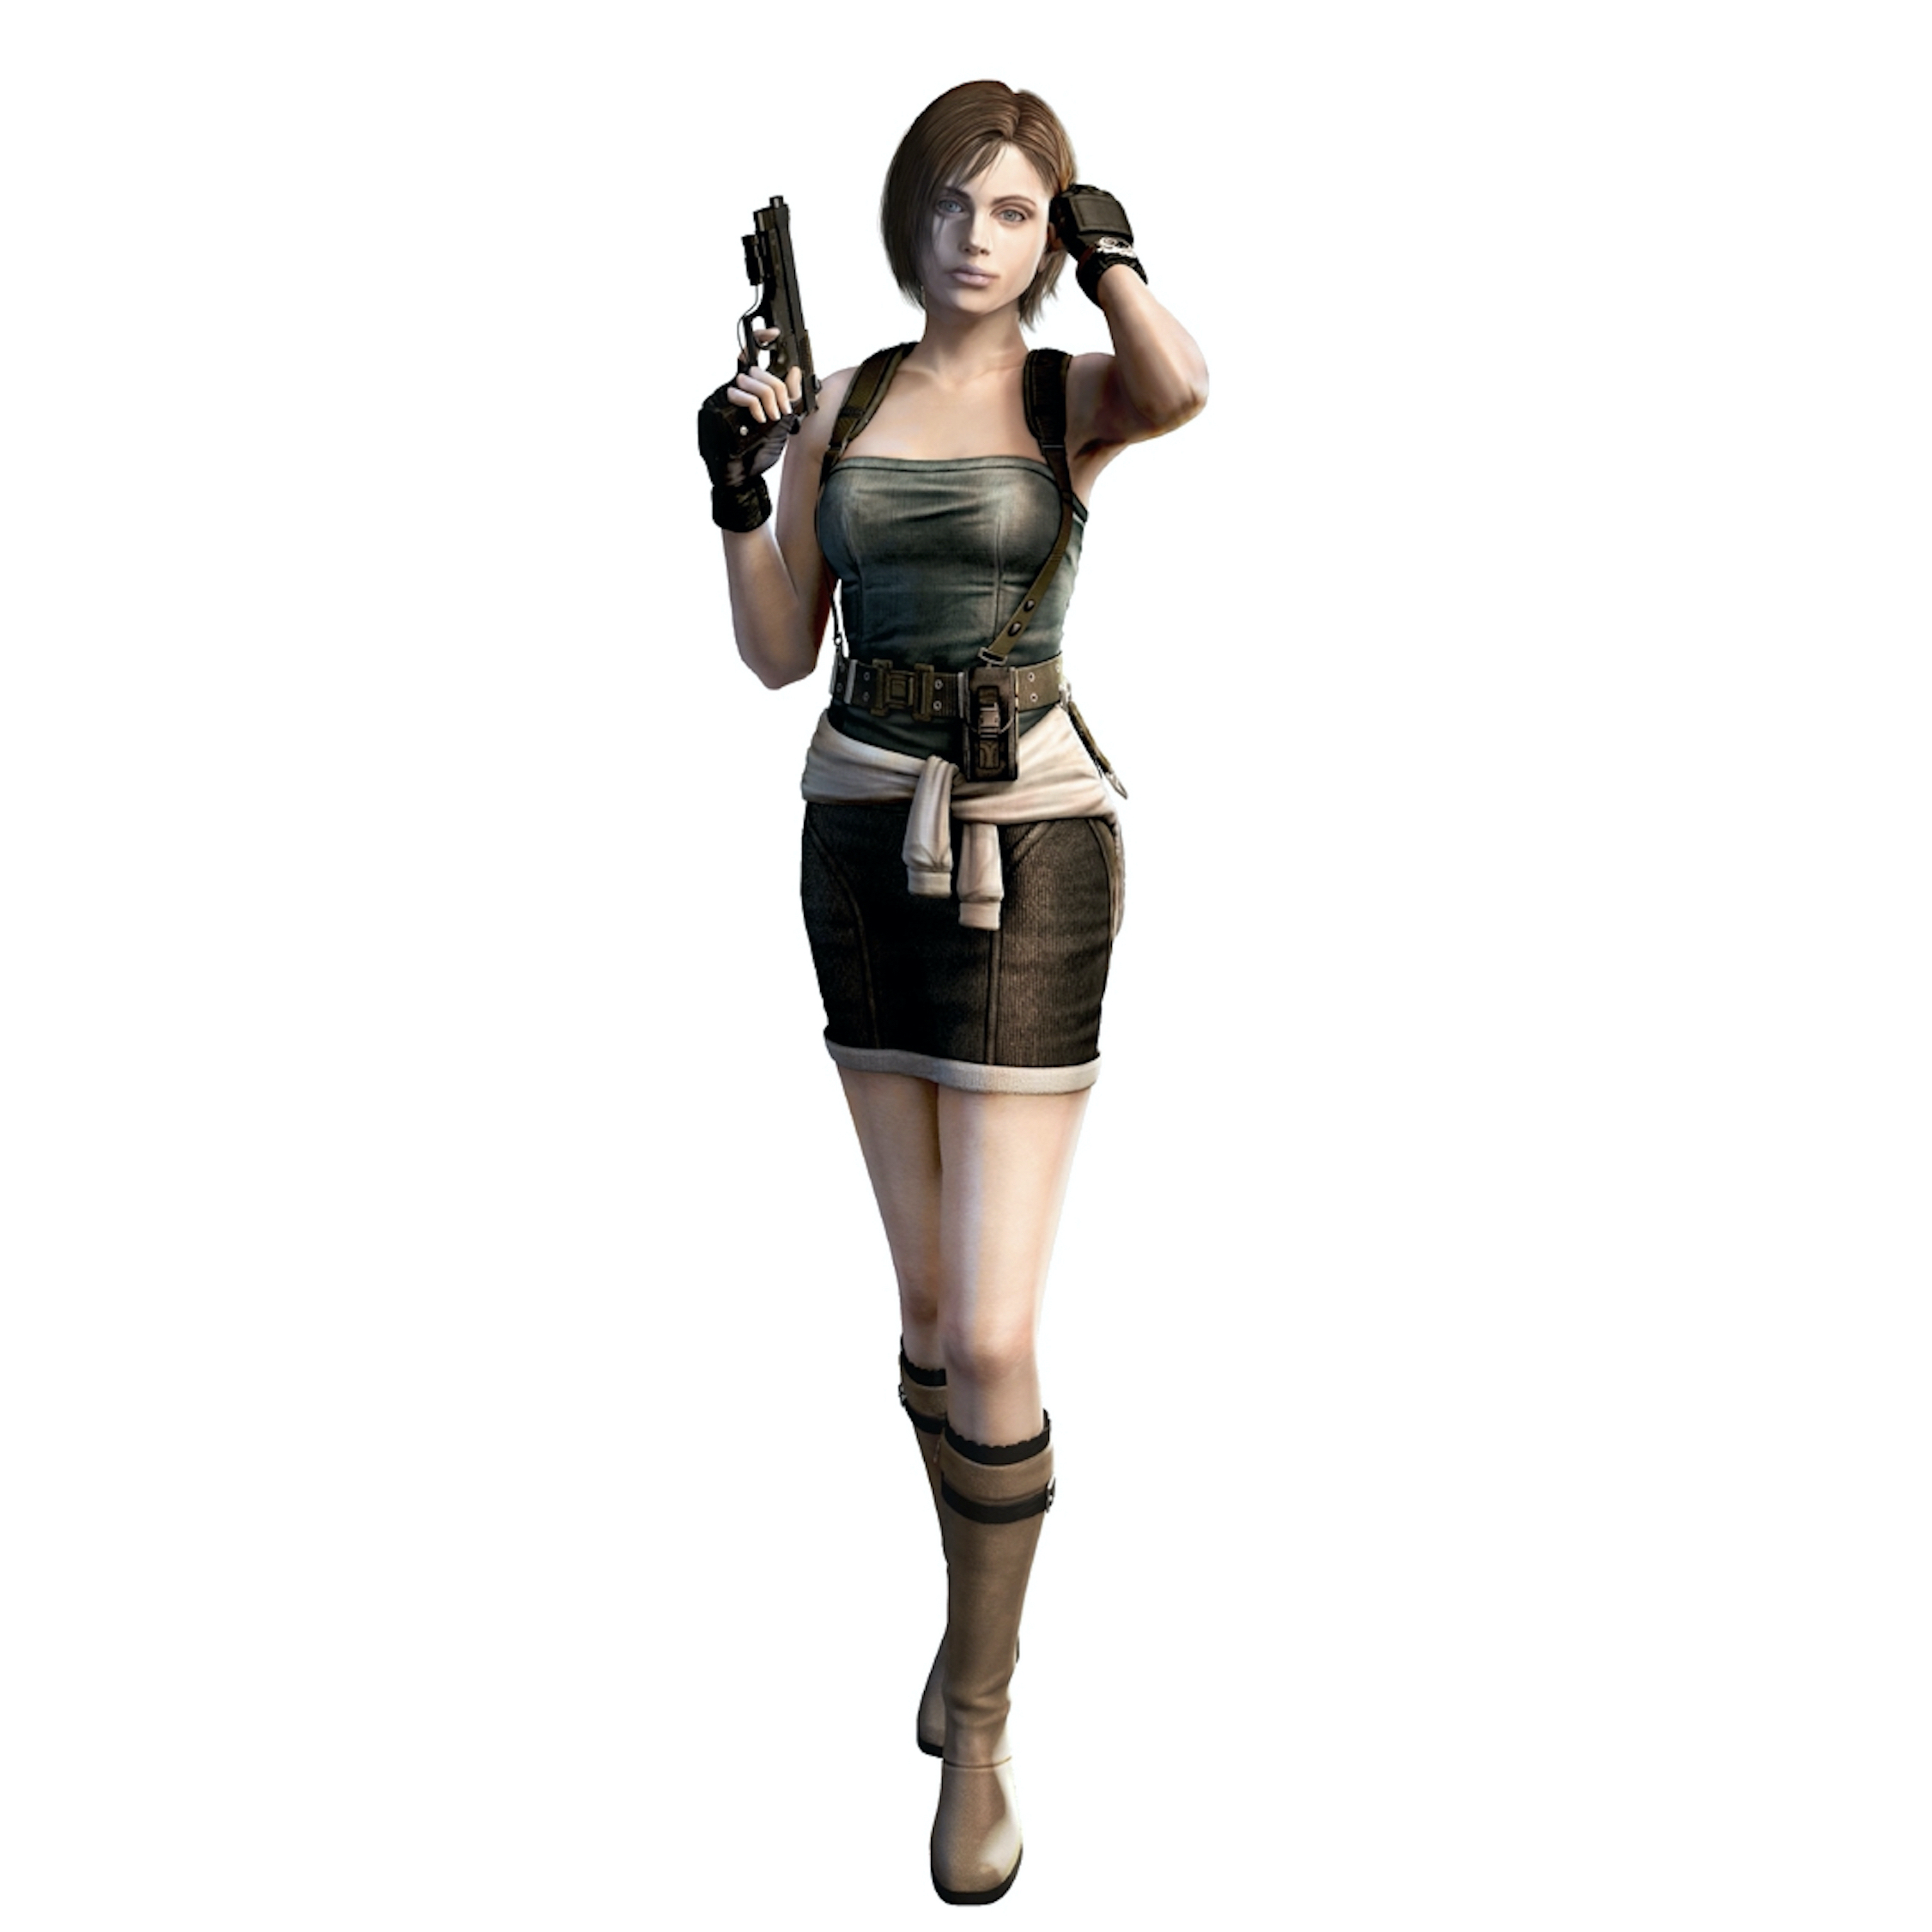 Resident Evil 4 Remake Reportedly Aims to be “Spookier,” Expand Ada Wong  Missions